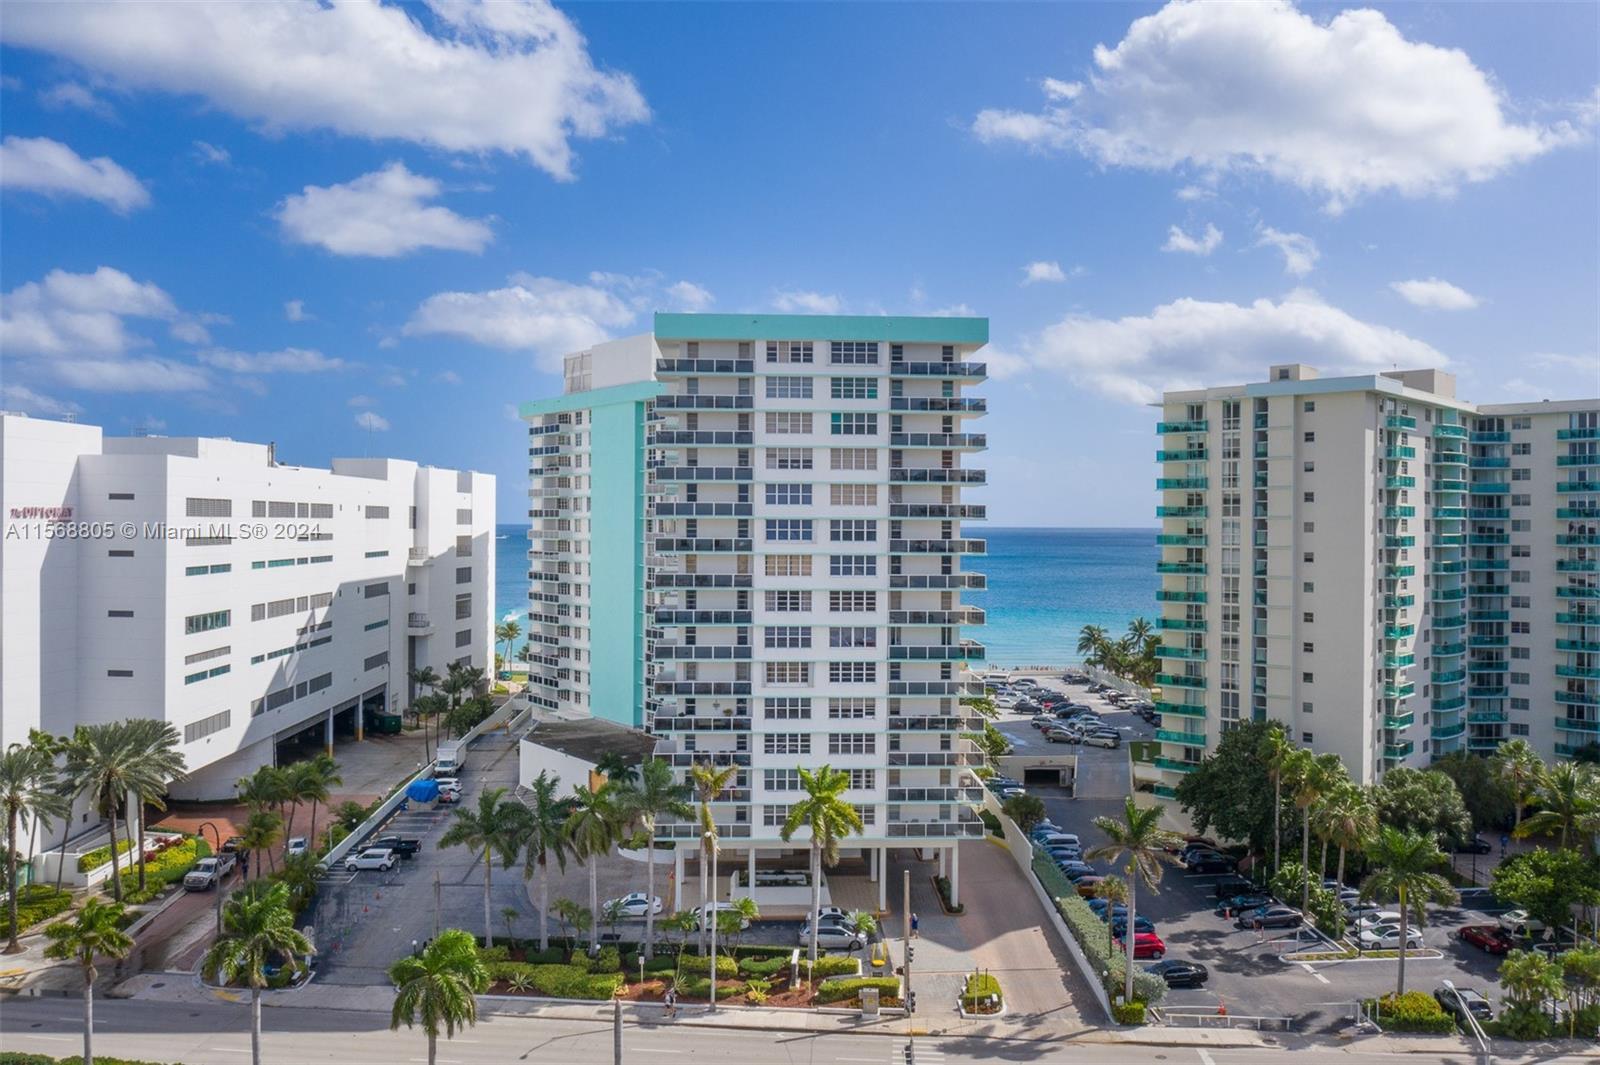 Photo of 3725 S Ocean Dr #601 in Hollywood, FL